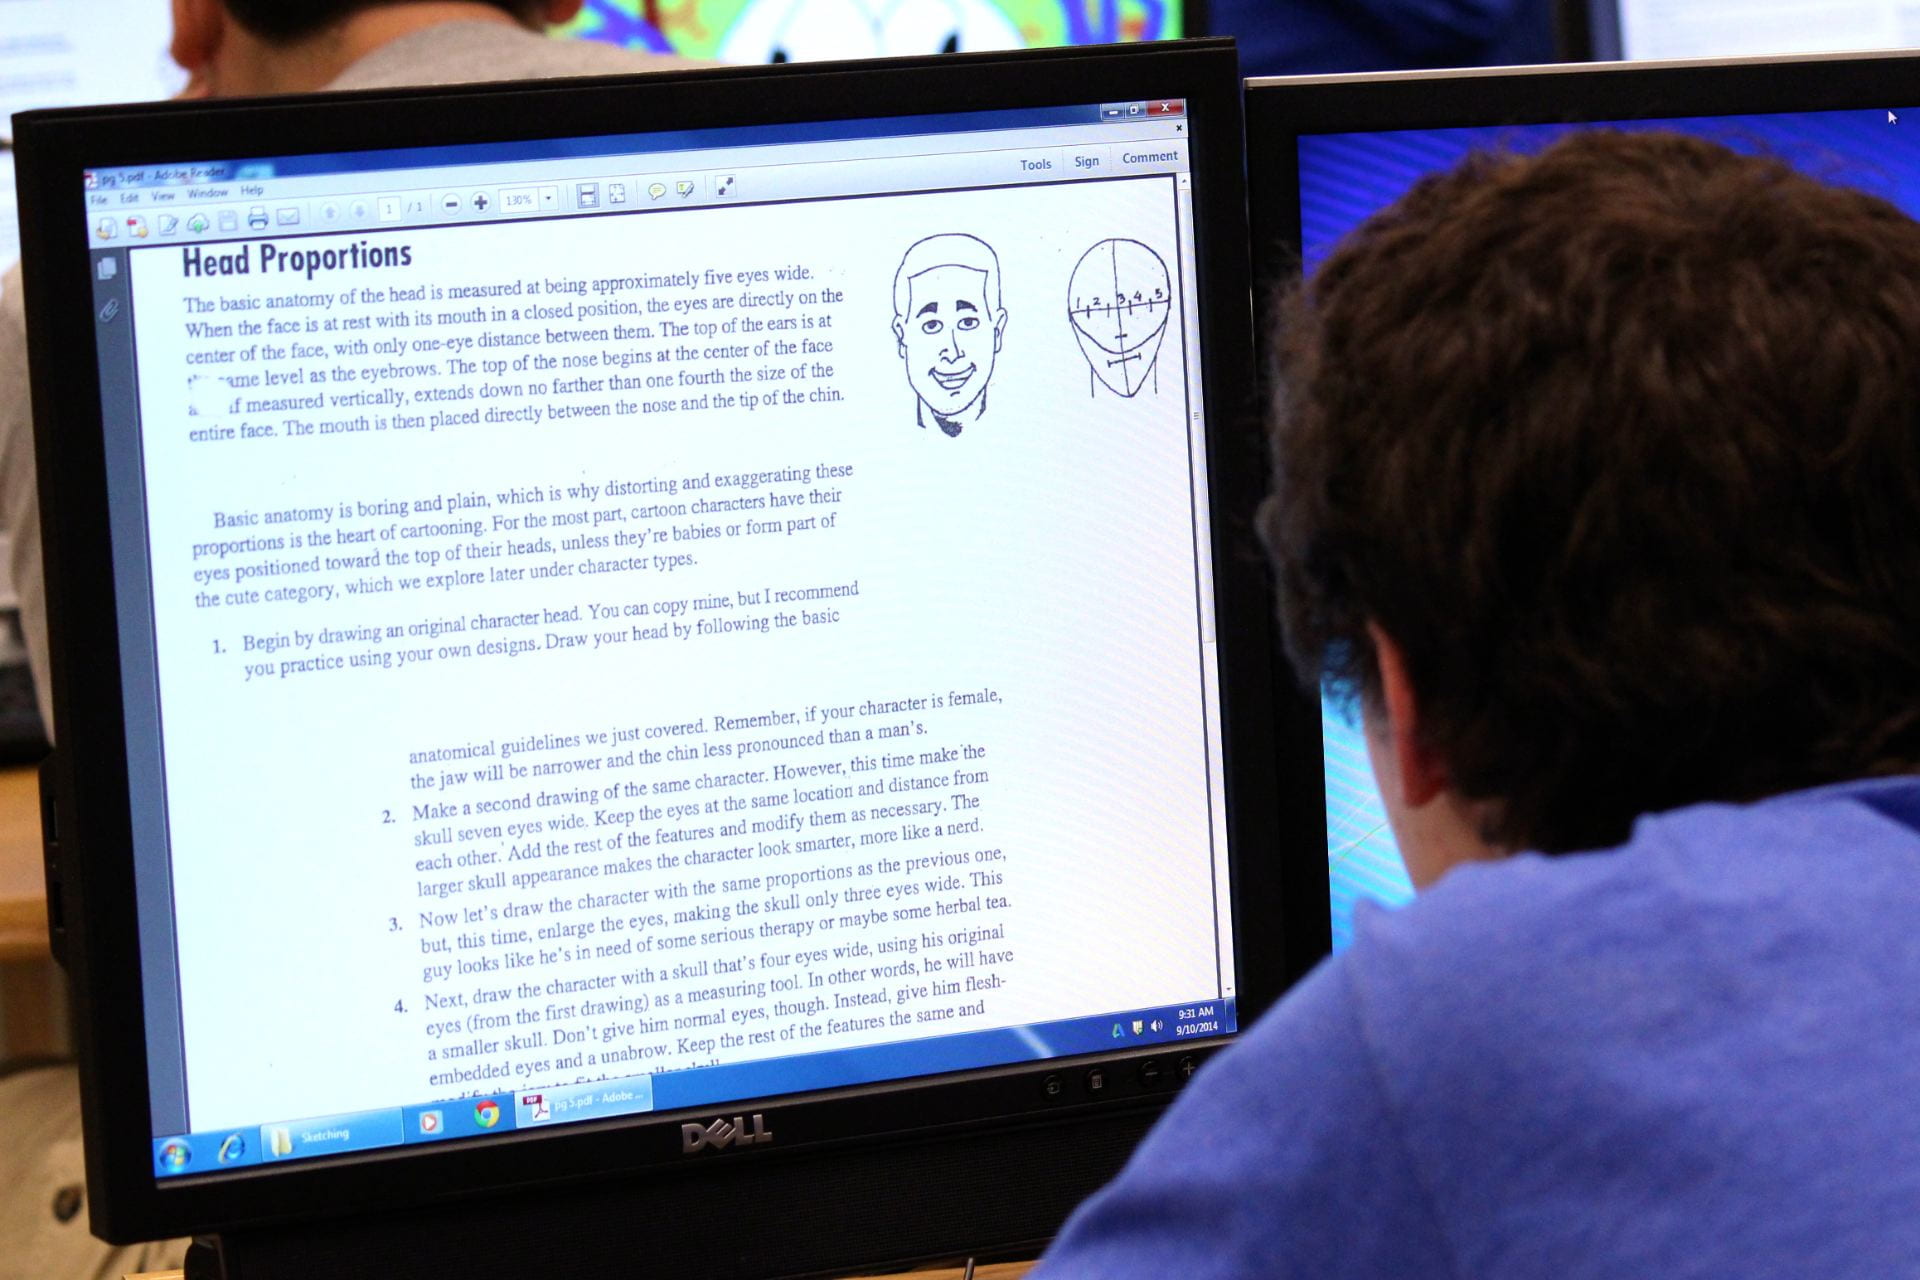 student looking at computer screen. Screen has instructions on how to animate human head